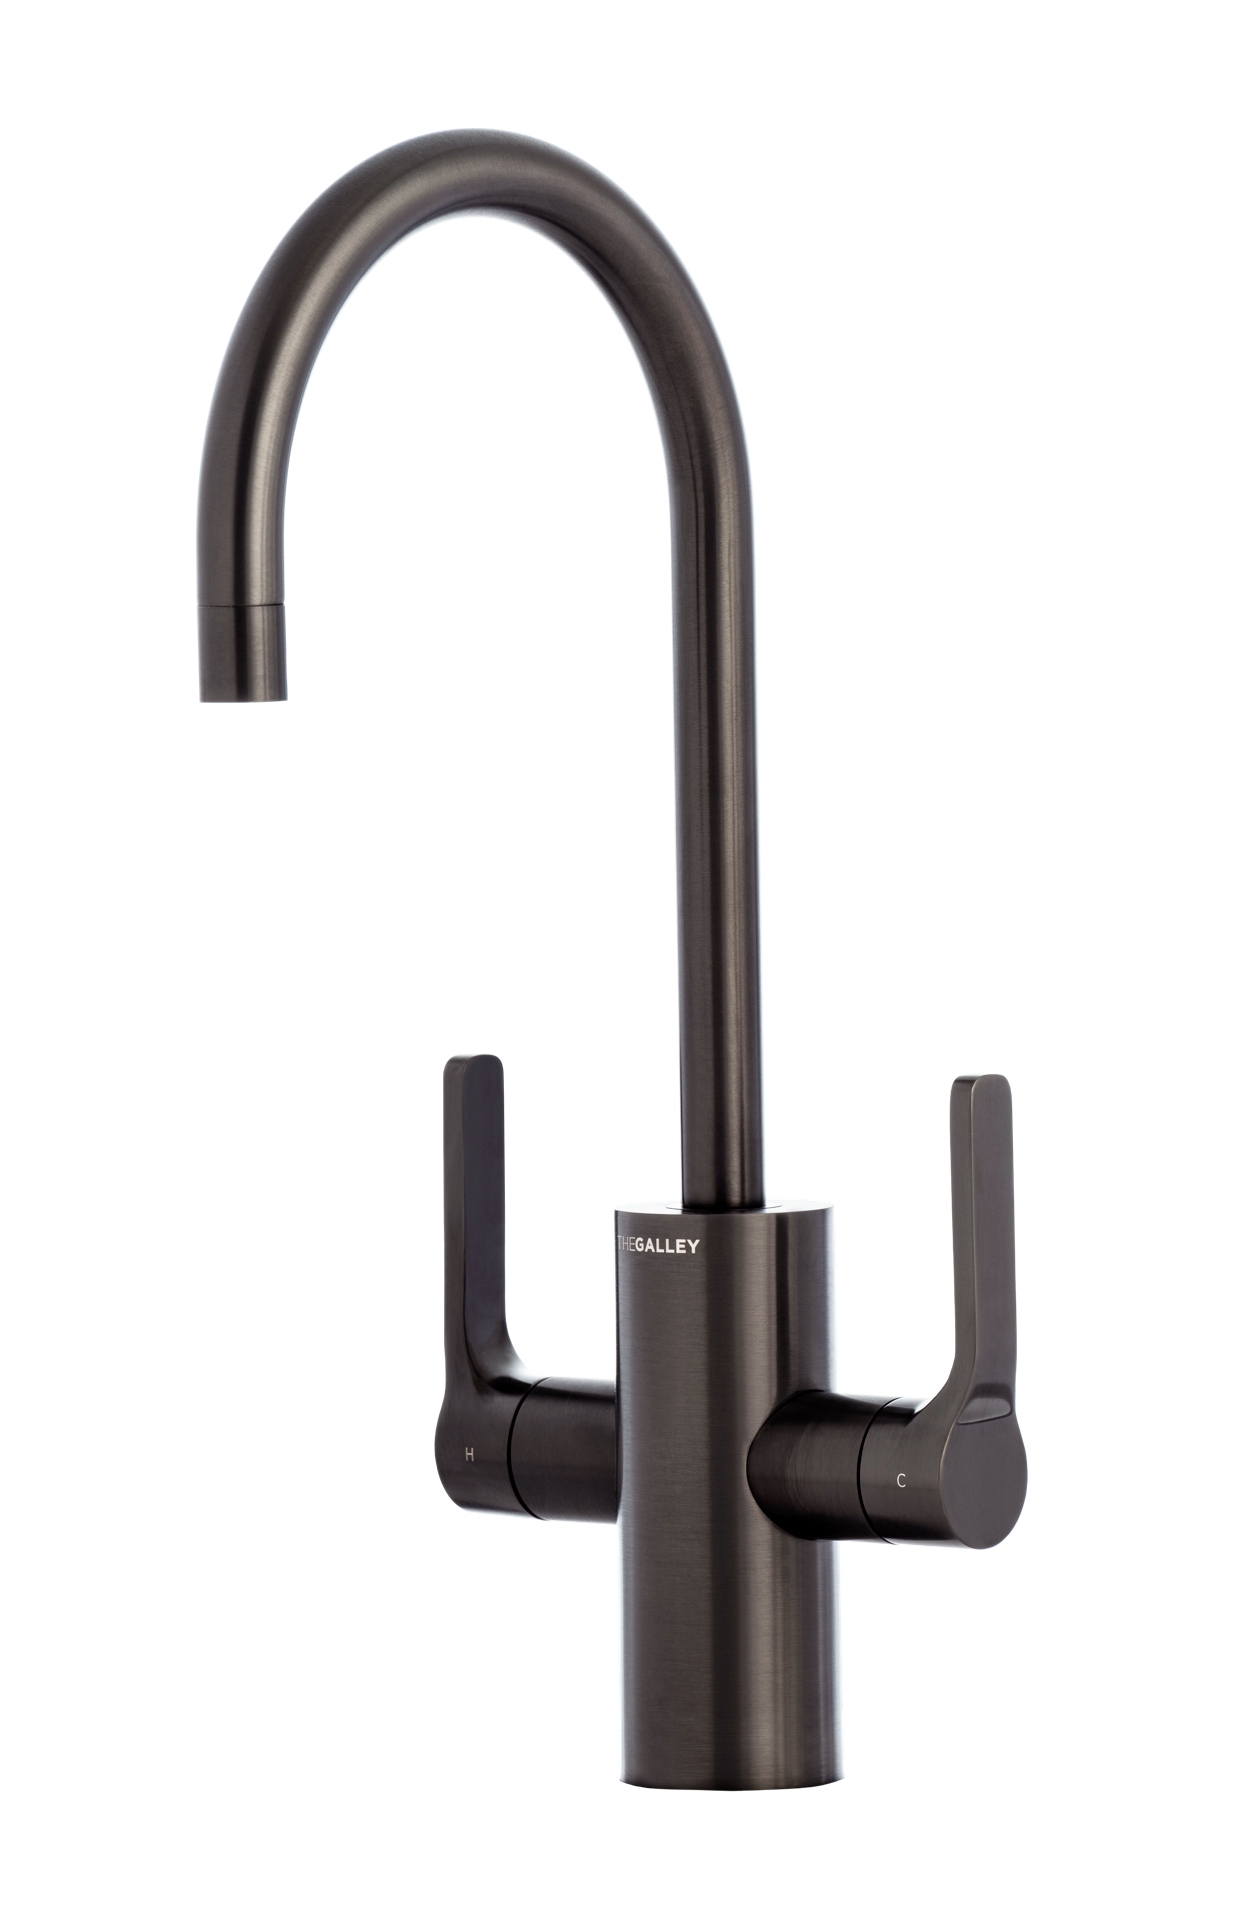 pvd satin black stainless steel faucet